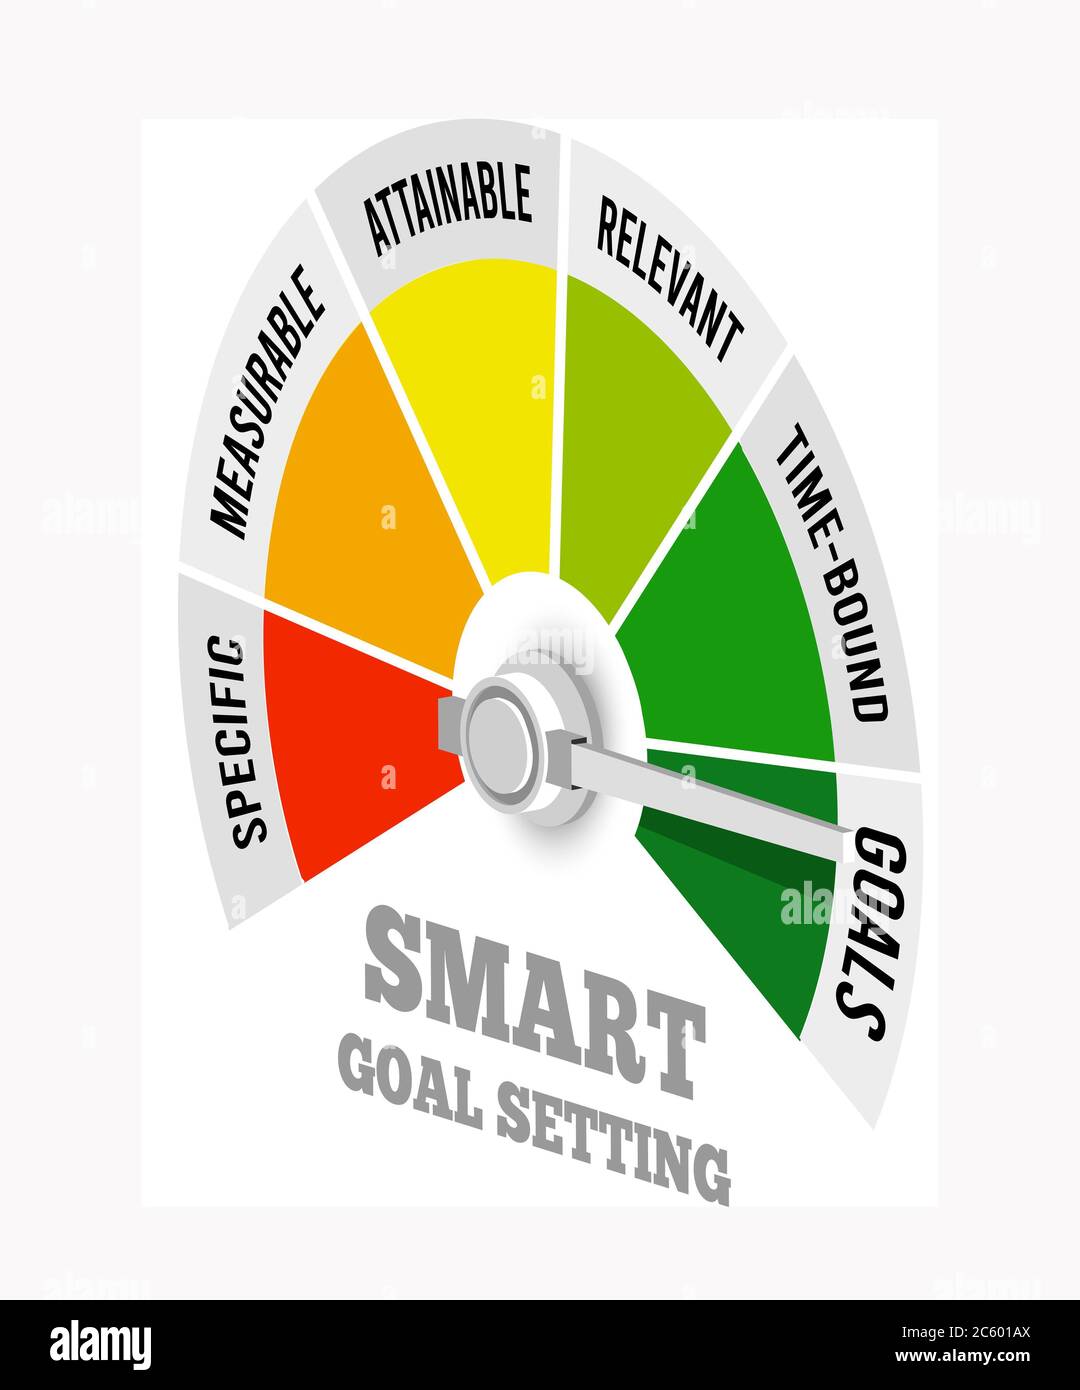 Smart goal setting. Vector illustration in the style of a speedometer on white. Stock Photo